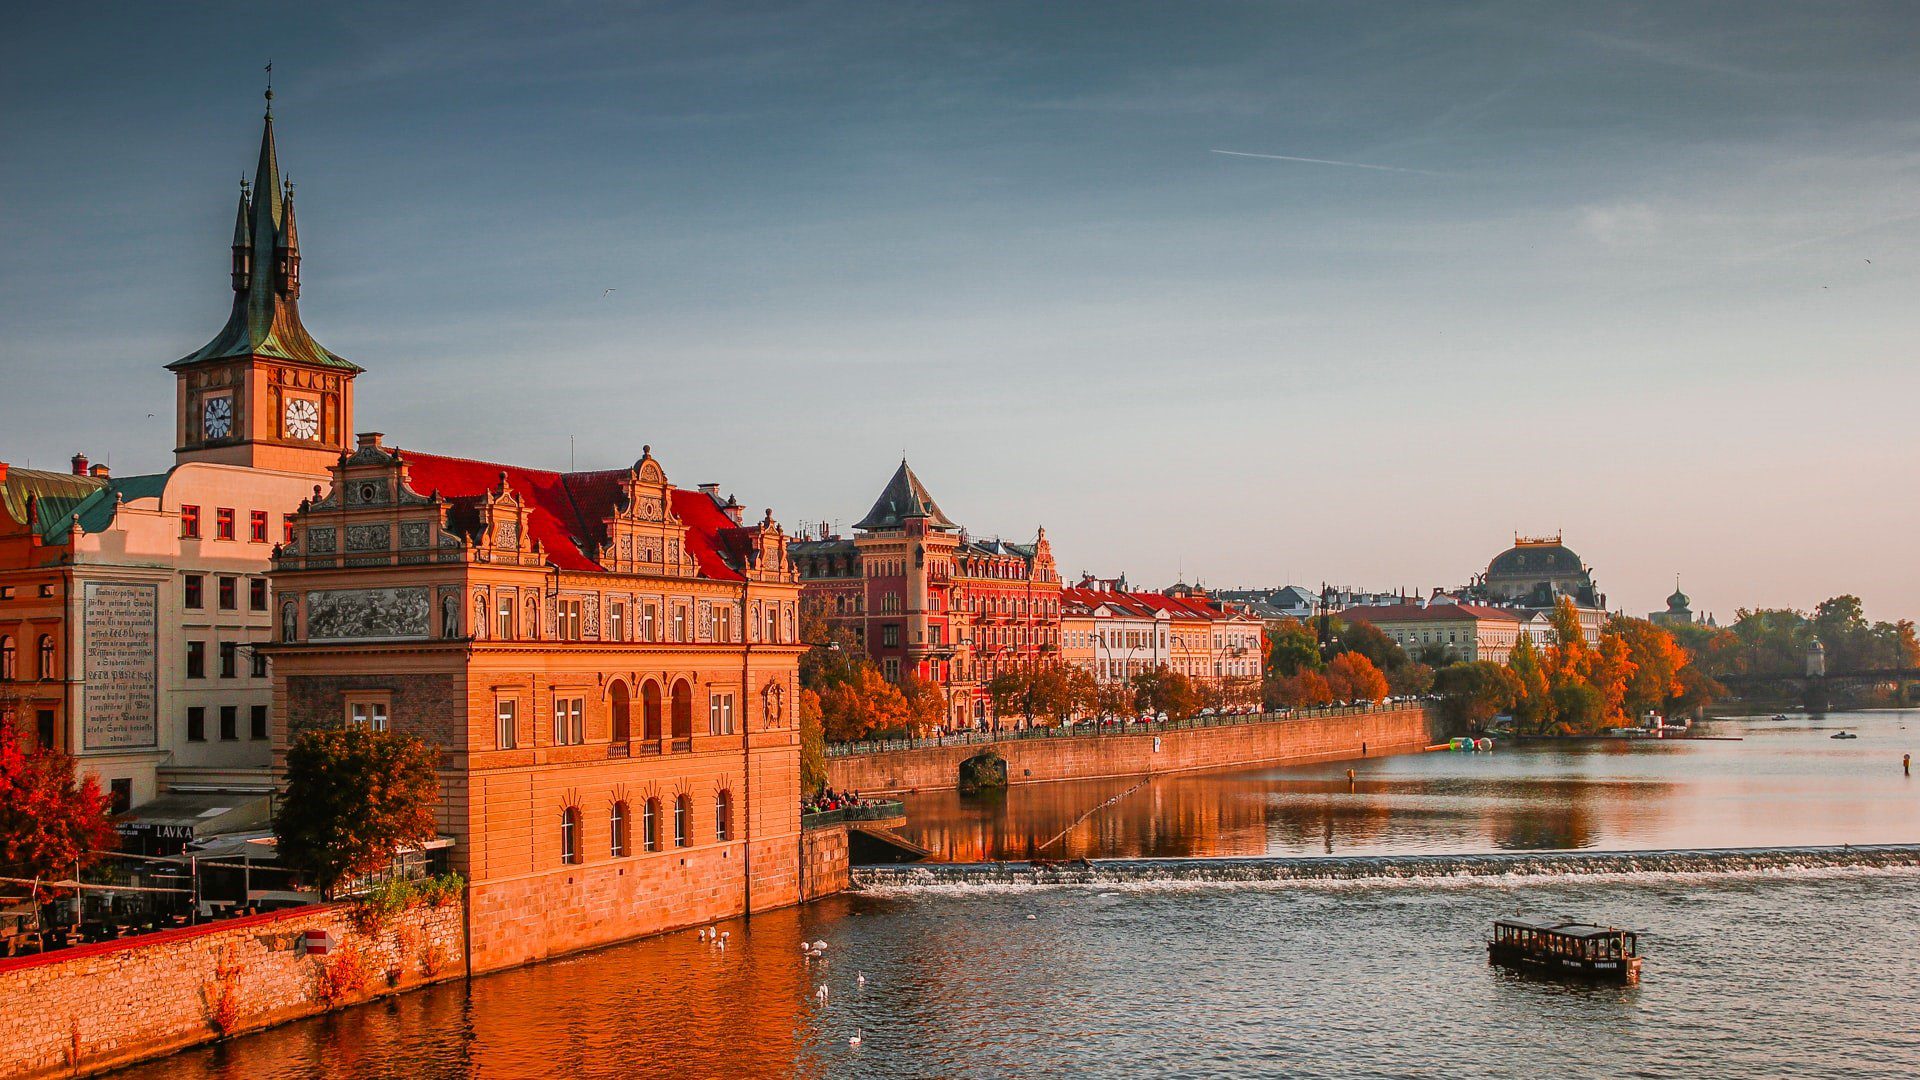 There’s a reason why we’re hosting LibertyCon in Prague. Here are our top three picks for reasons to visit Prague this spring!